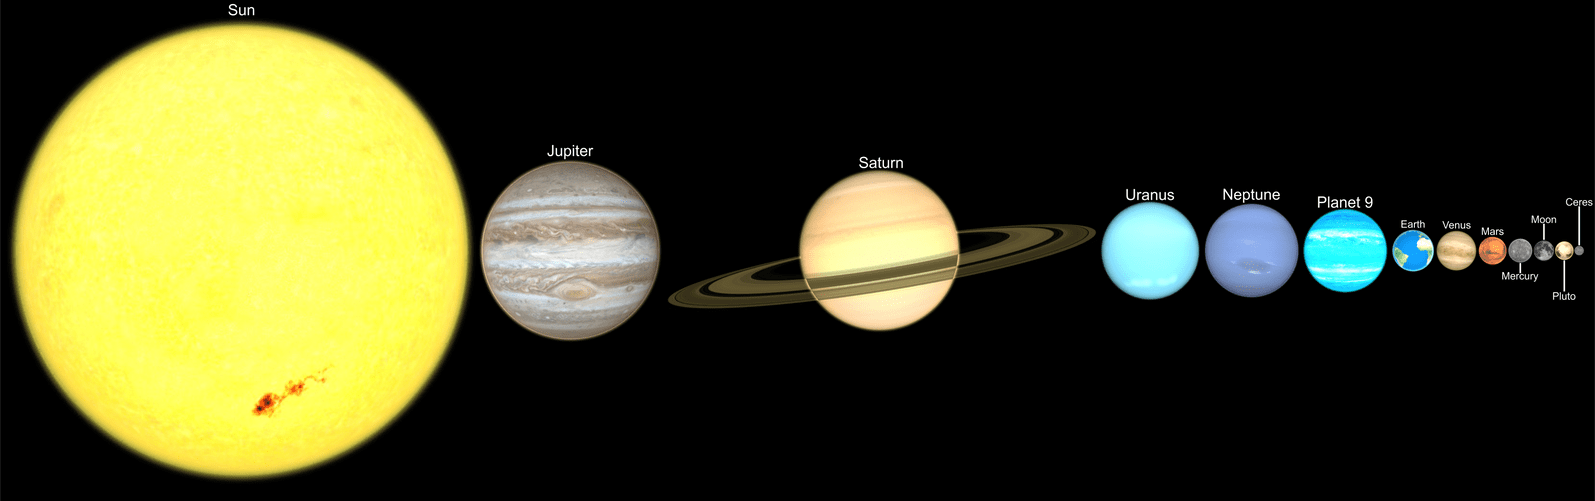 how big are the planets in the solar system